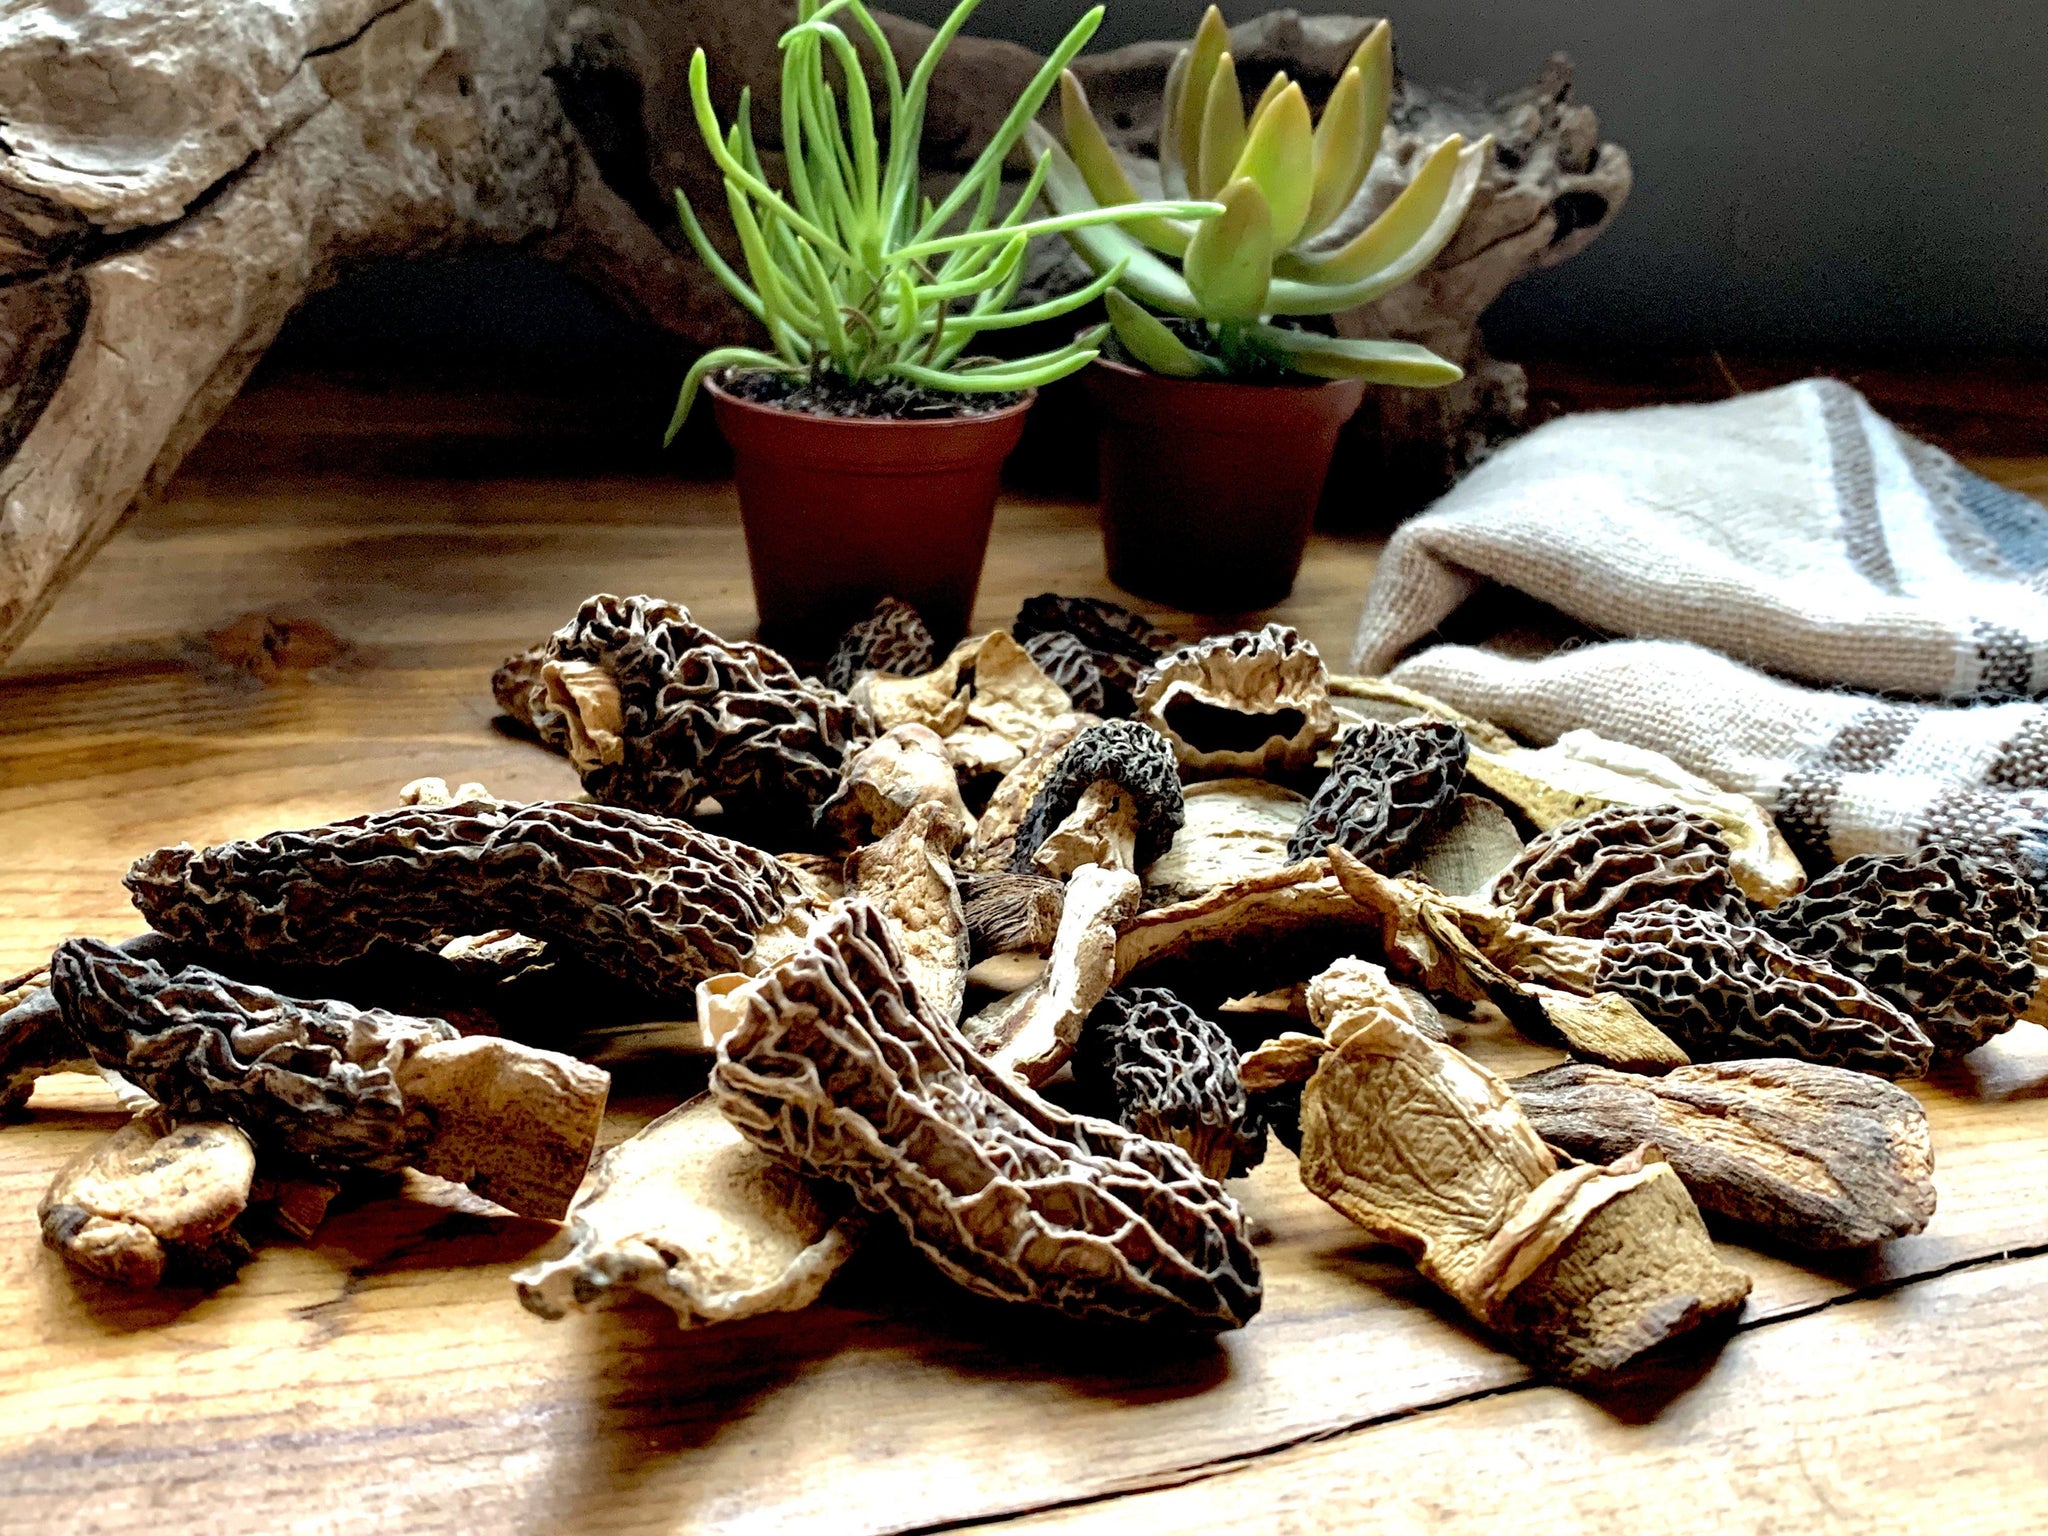 How to Work with Dried Mushrooms